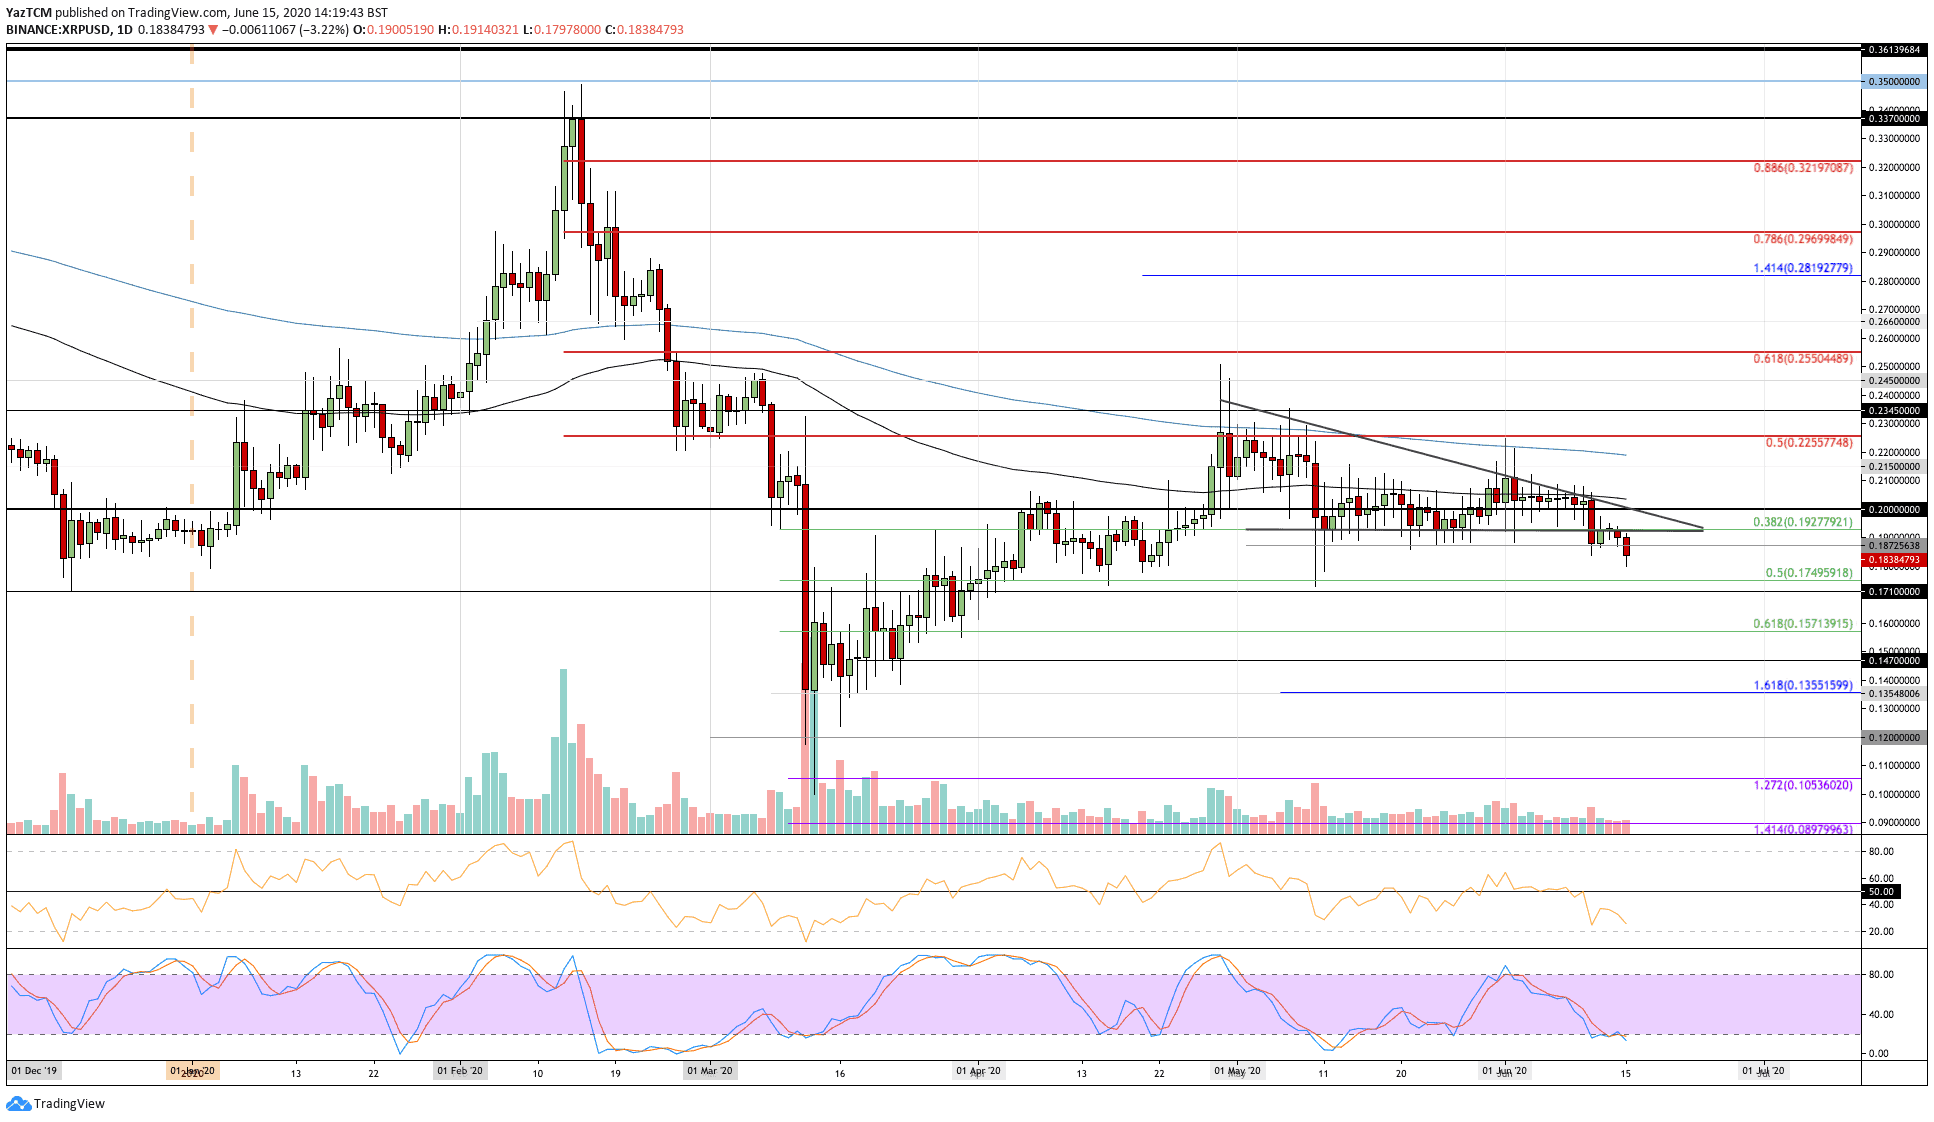 Ripple Price Analysis: Potential Disaster For XRP Following a Drop Below $0.19